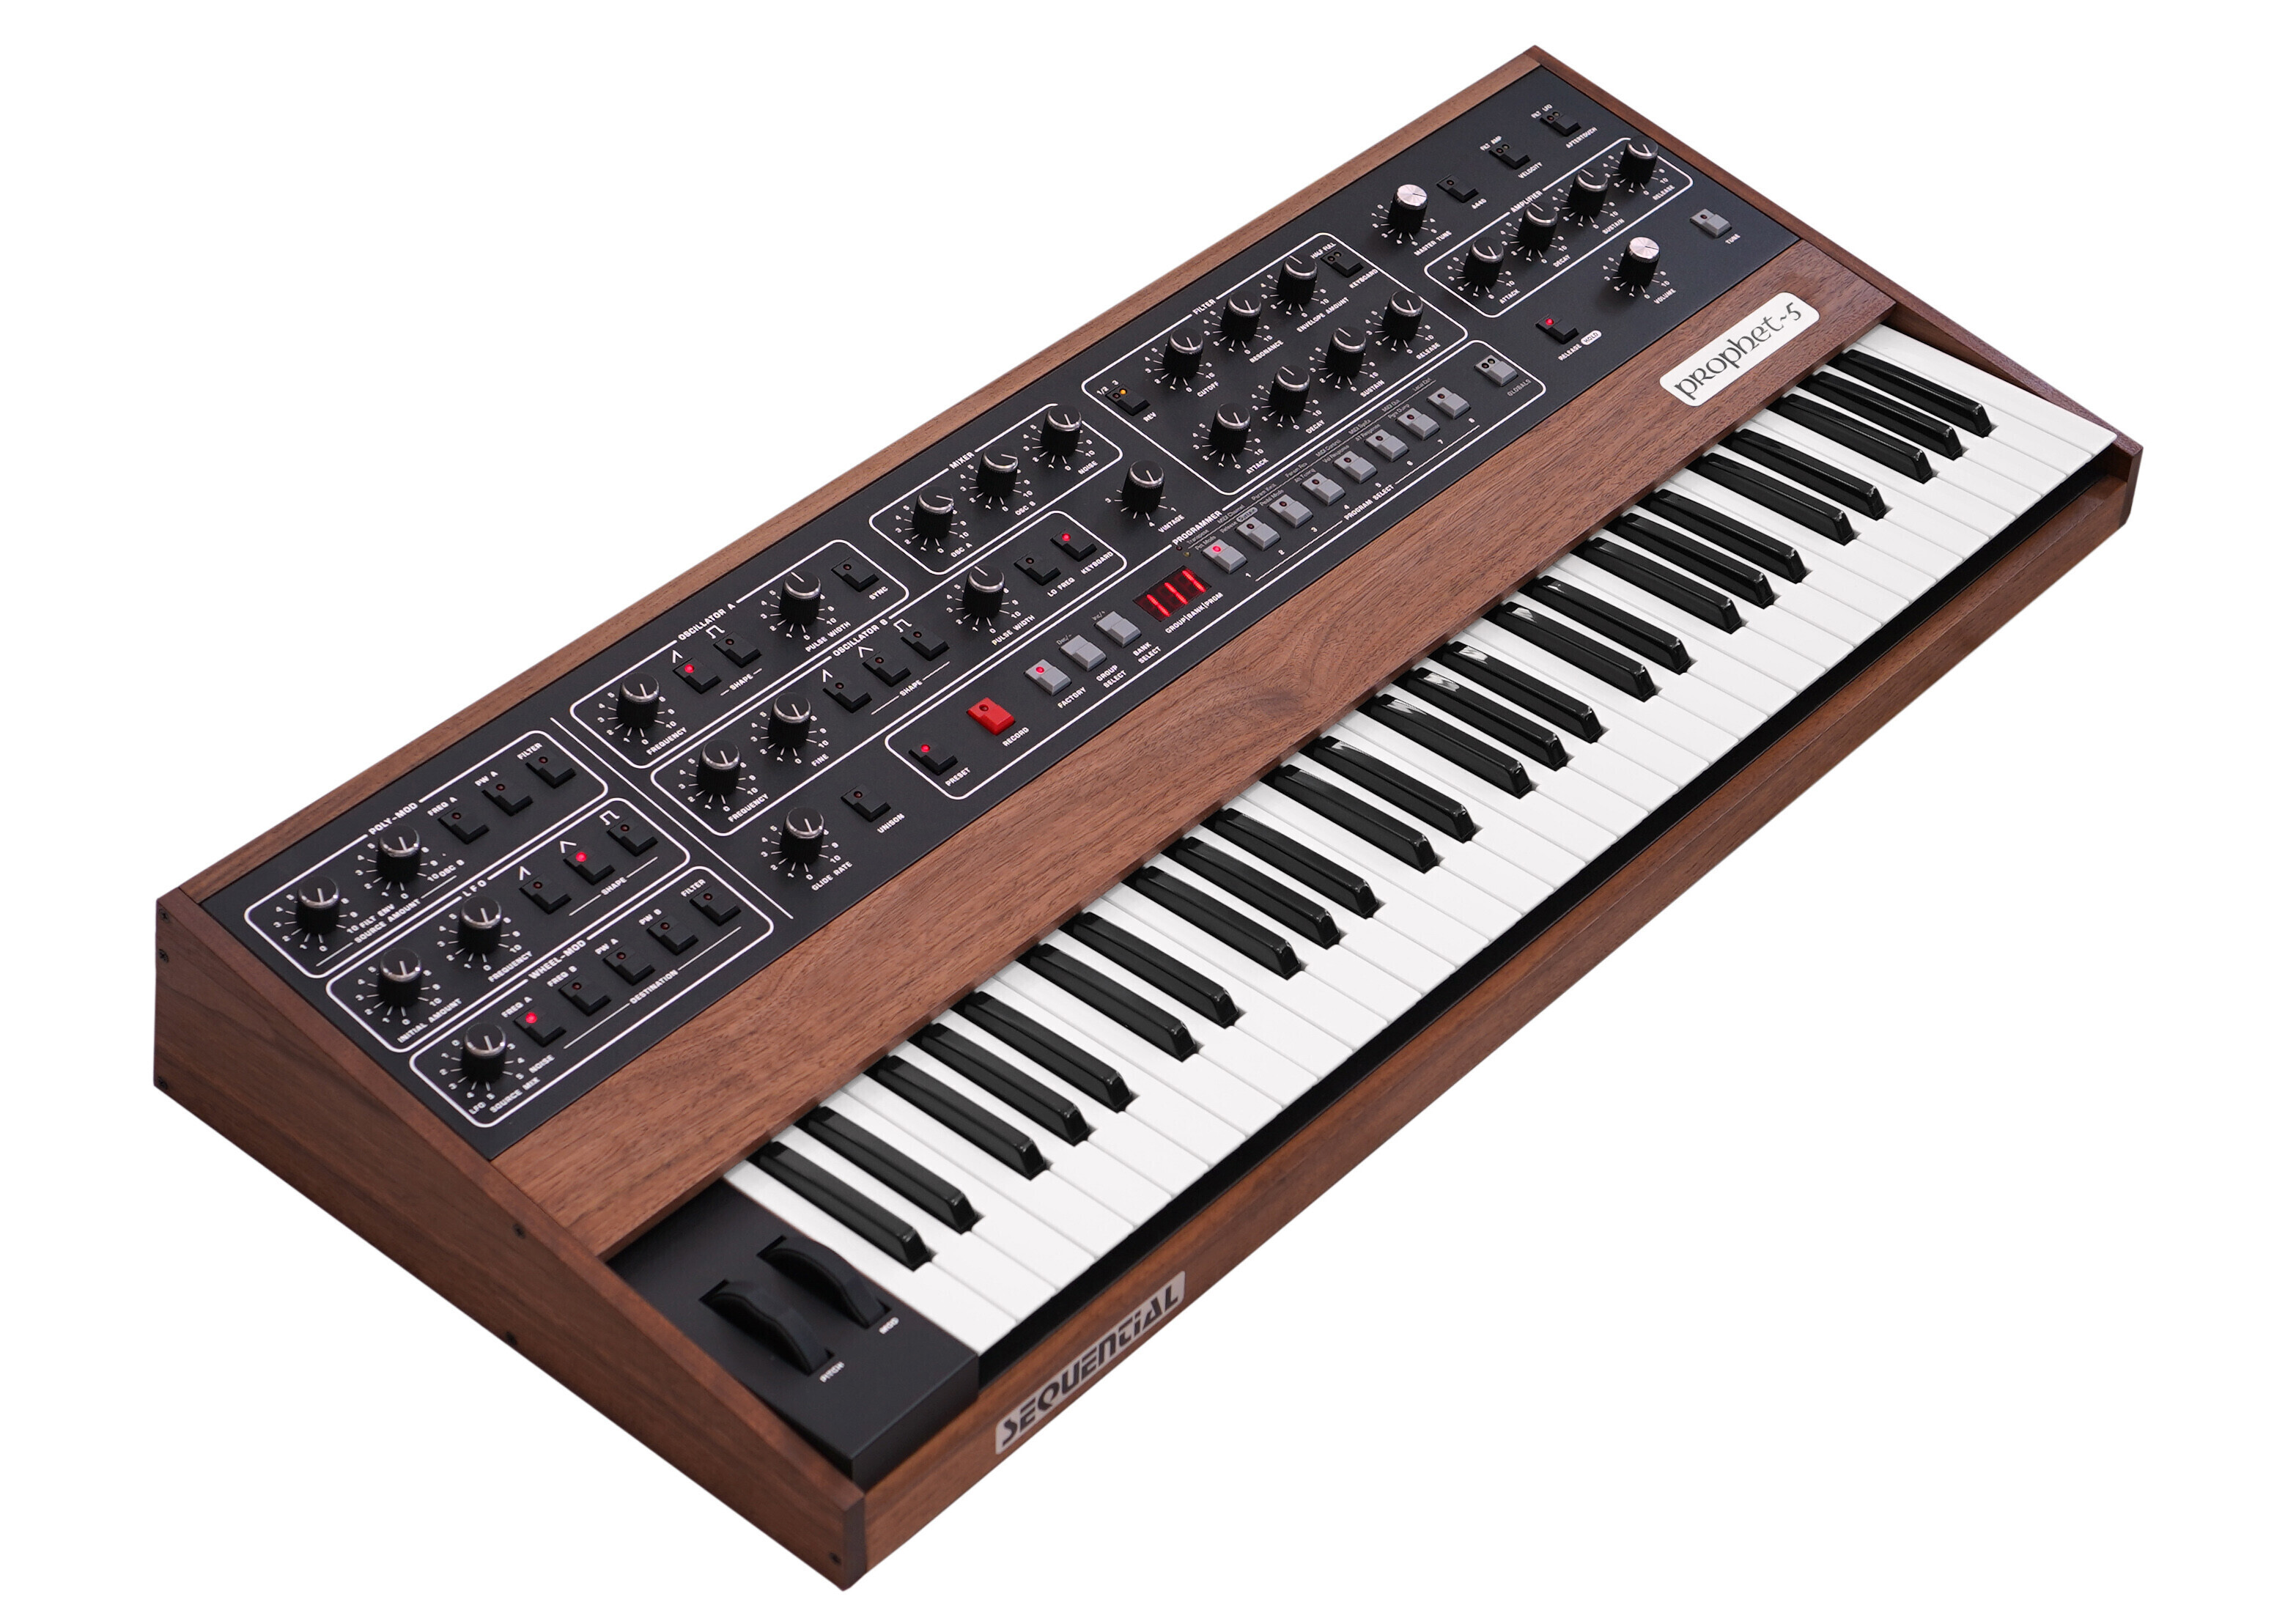 Dave Smith Instruments Sequential Prophet-5 Keyboard по цене 310 250 ₽